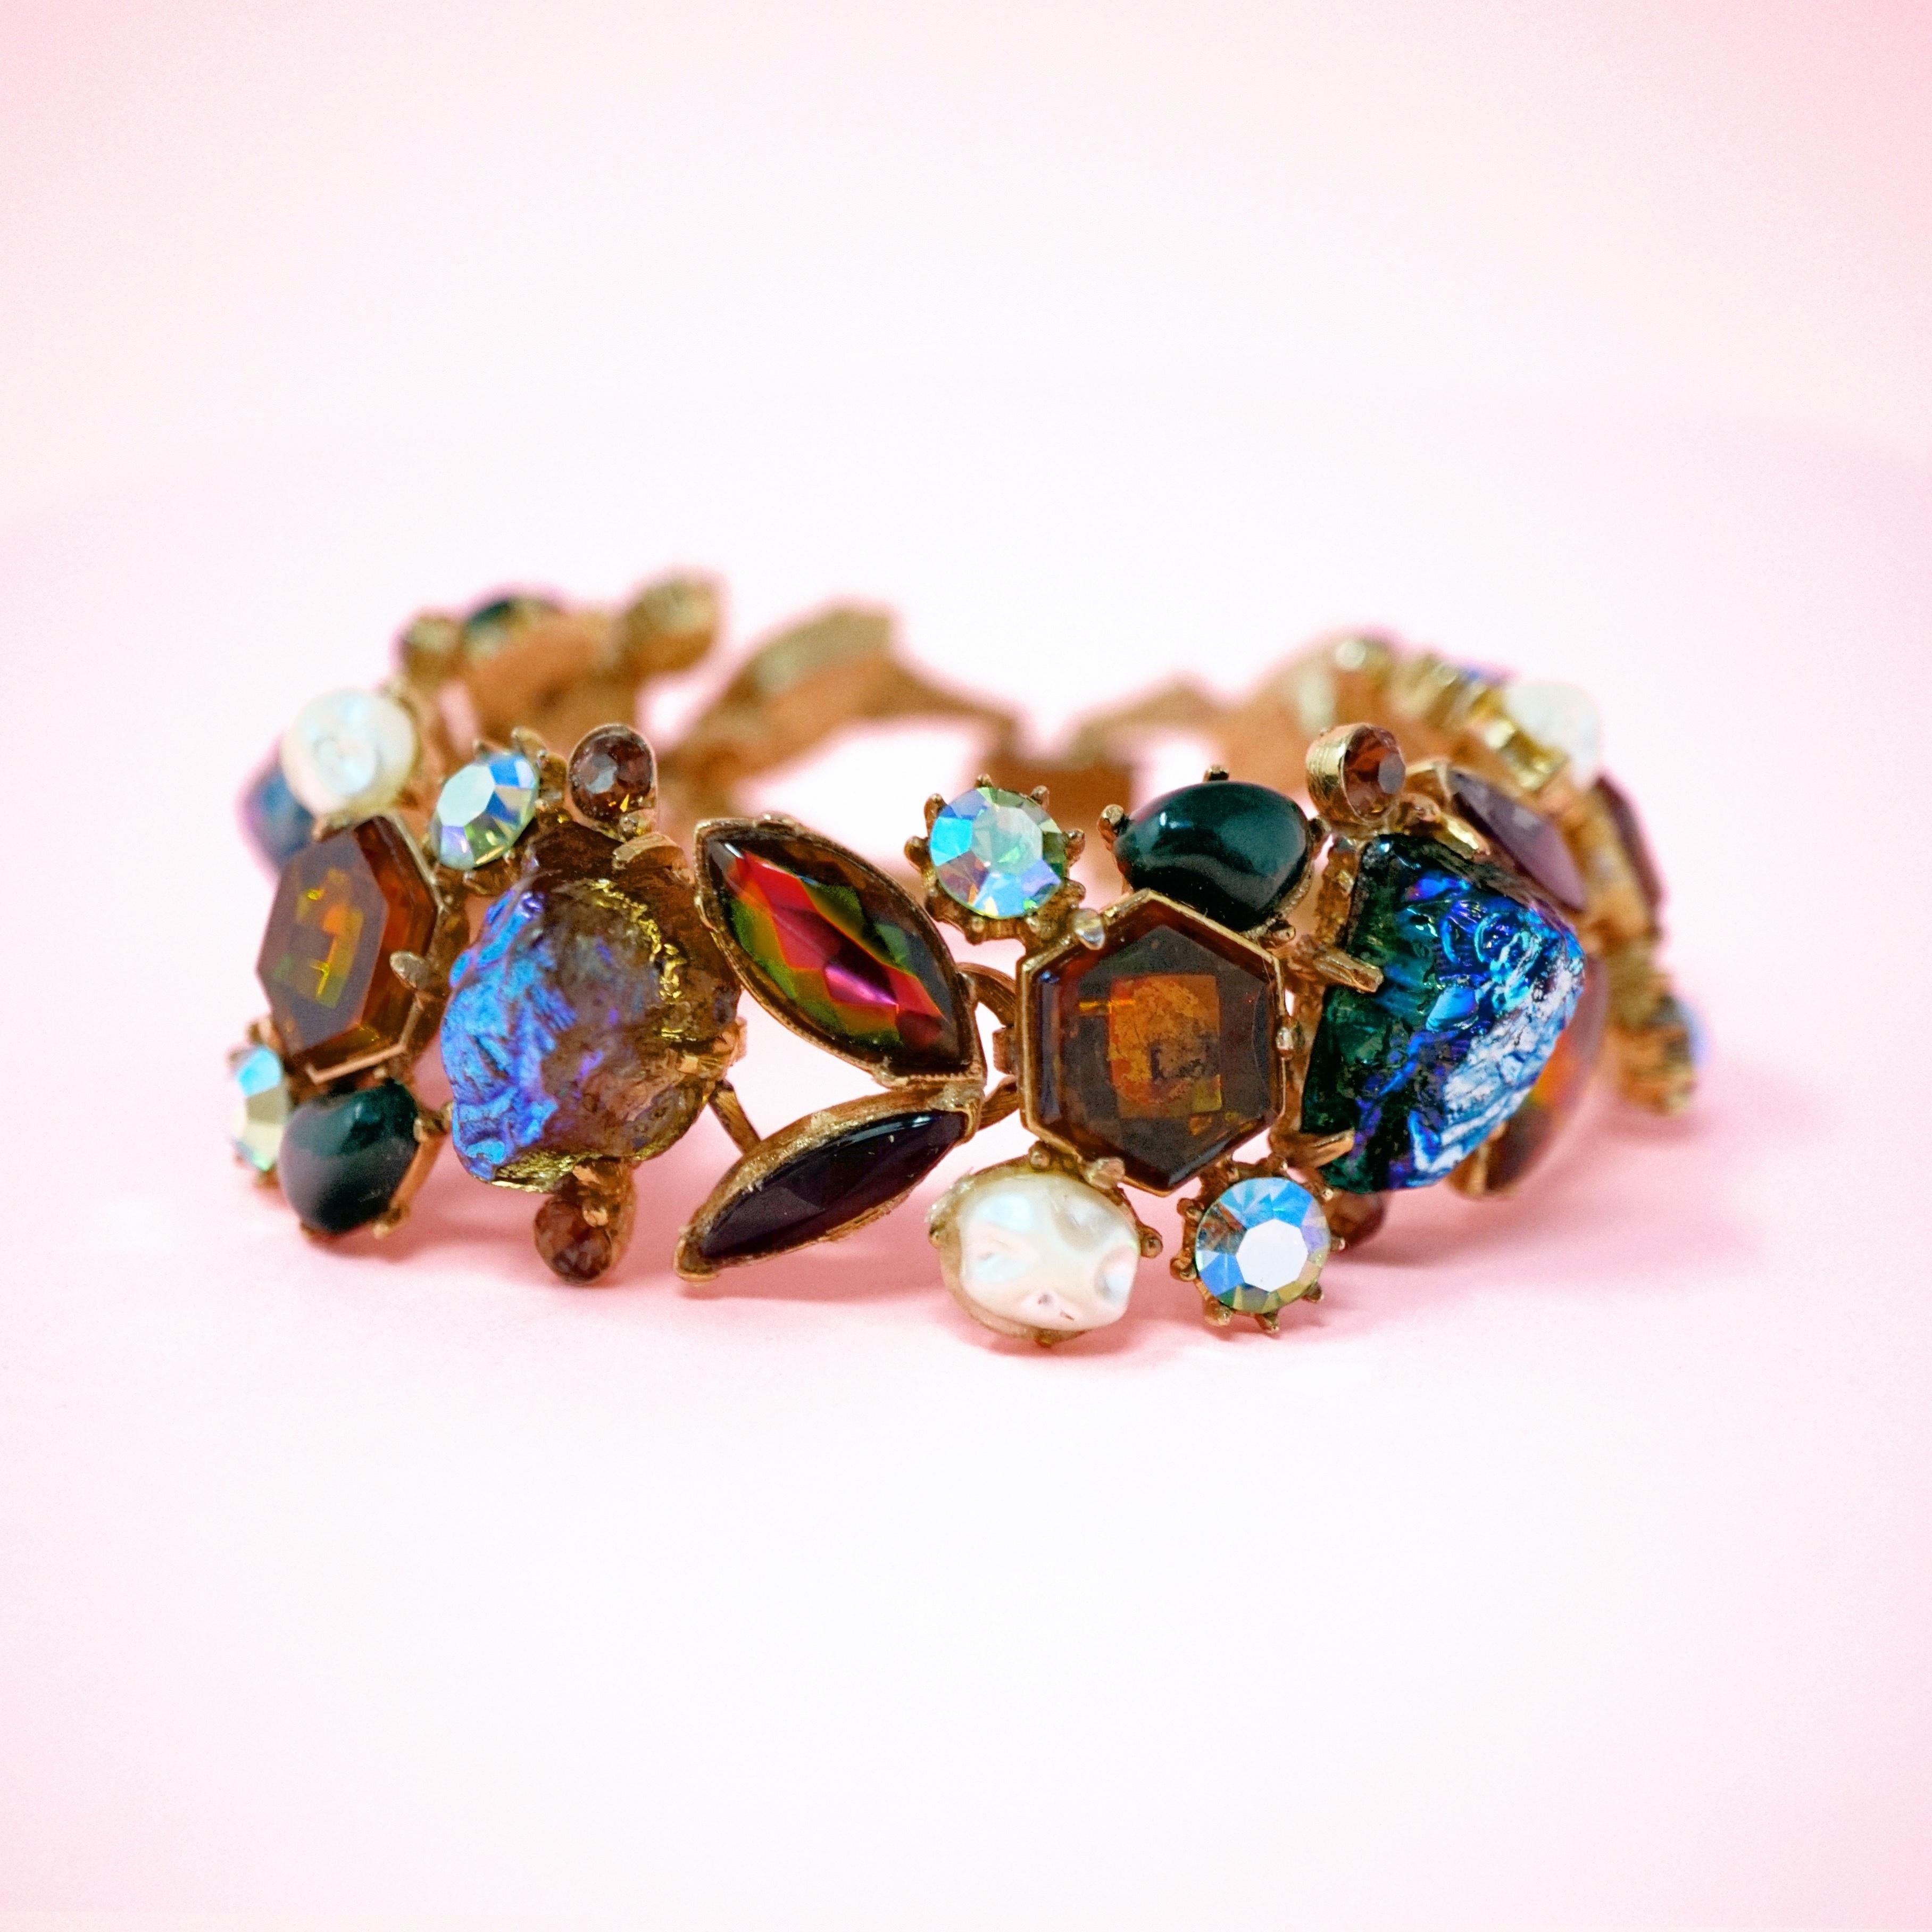 This unique gilded statement bracelet by Florenza is a real eye catcher! A medley of striking cabochons including faux pearls, Aurora Borealis crystals and faceted amber-colored rhinestones come together for a truly mesmerizing look!

ABOUT